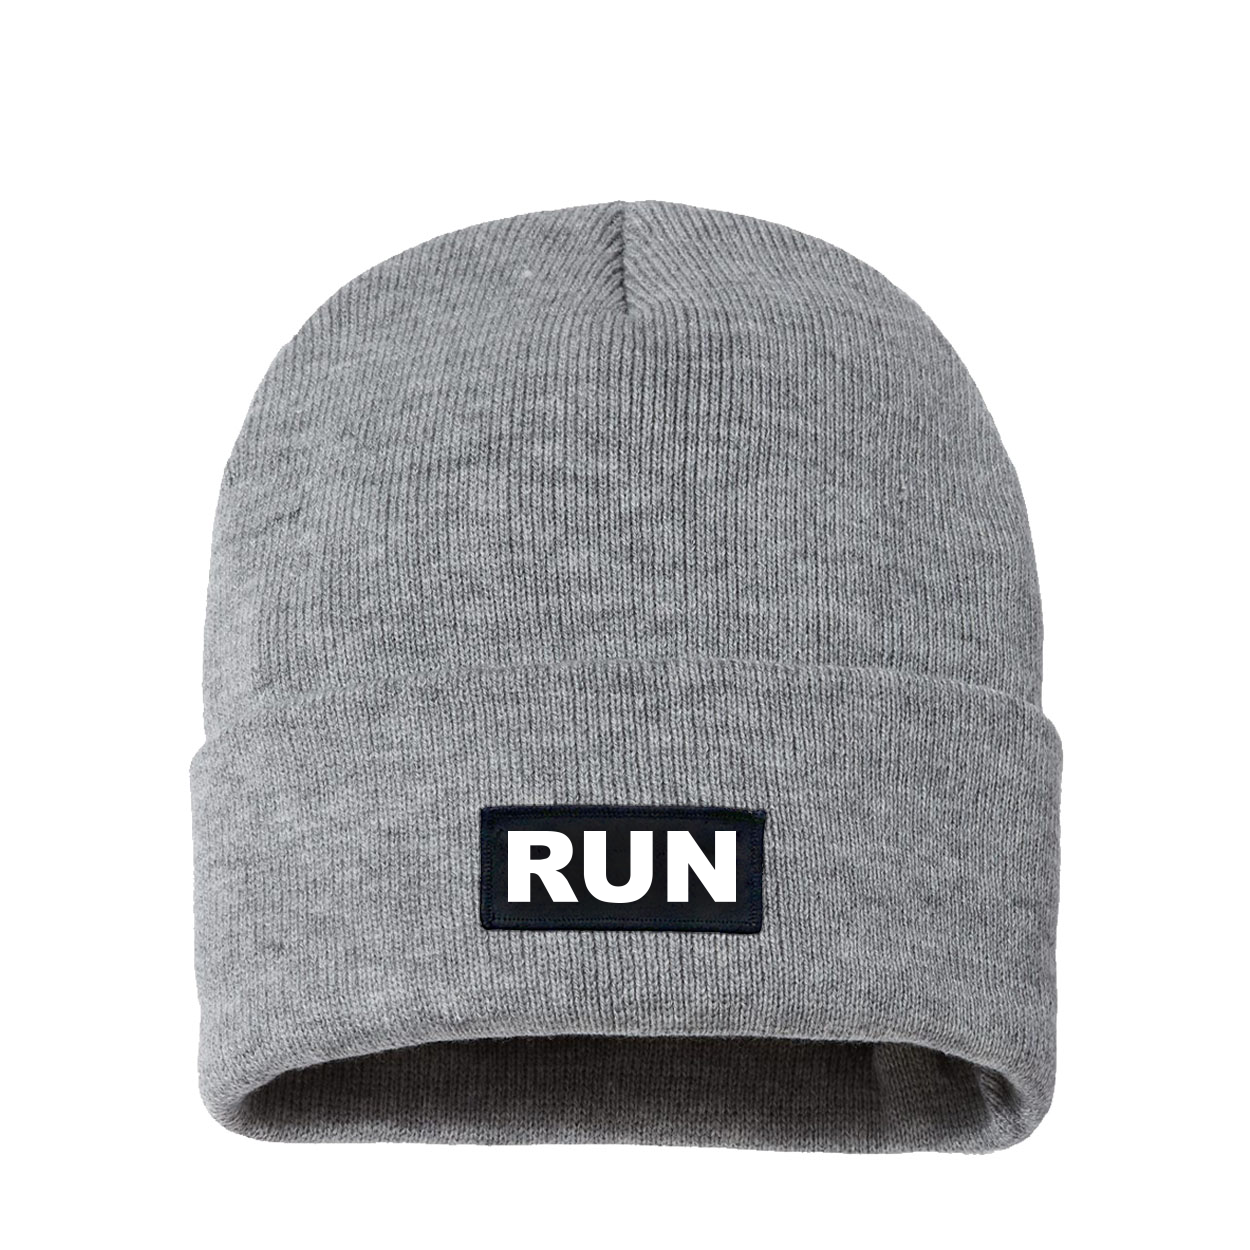 Run Brand Logo Night Out Woven Patch Sherpa Lined Cuffed Beanie Heather Gray